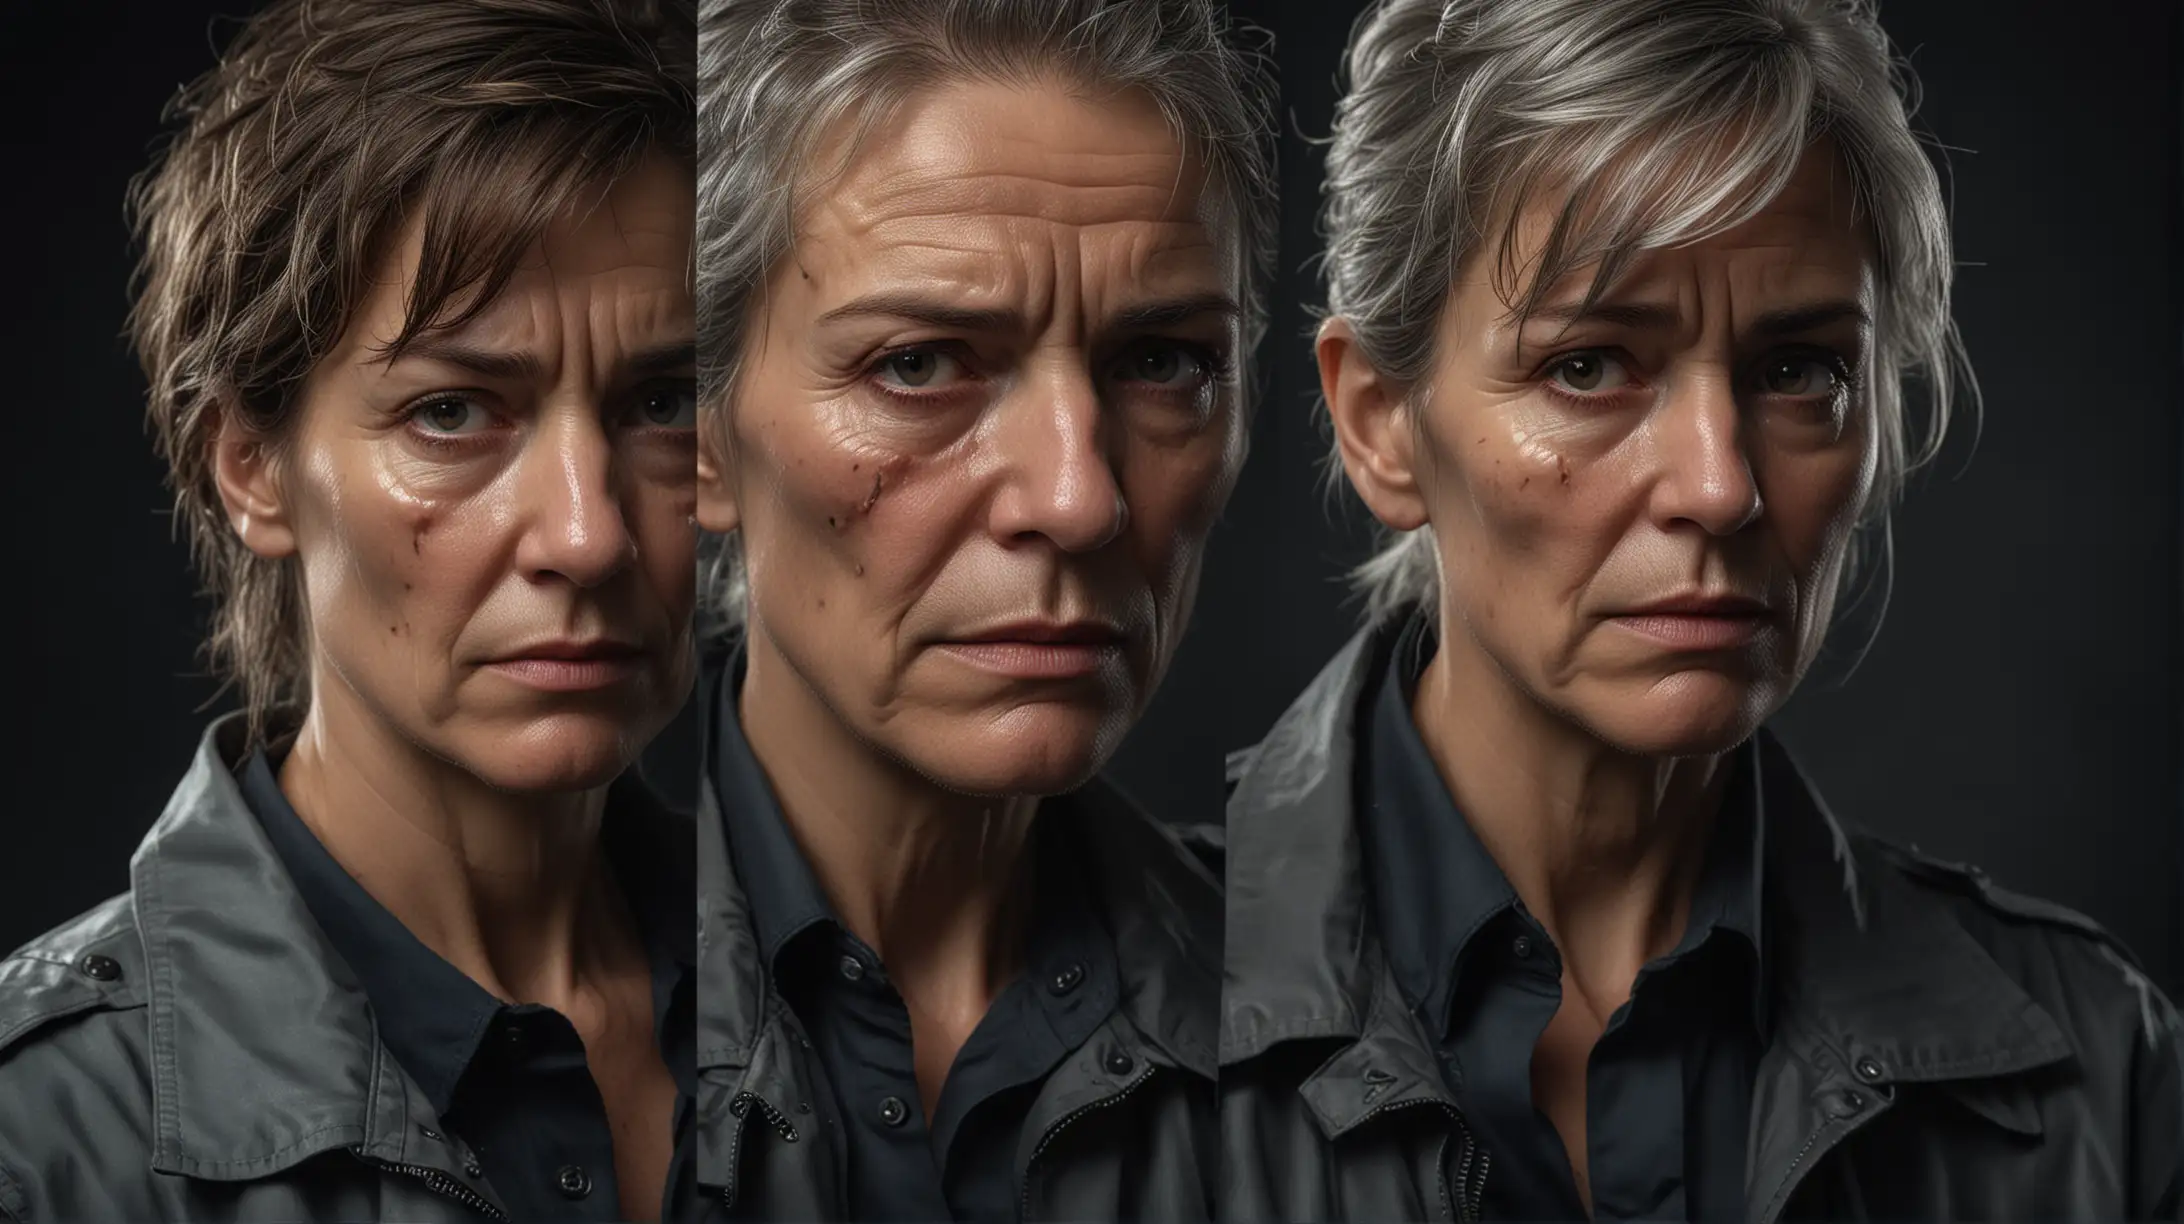 CLASSIC CLOSE UP PORTRAIT PHOTOGRAPHY STYLE,  DIFFERENT MALE AND FEMALE OLDER UNDERCOVER FEDERAL AGENTS, SWEATING, rumpled clothes, weary expressions, photo realistic, cinematic lighting